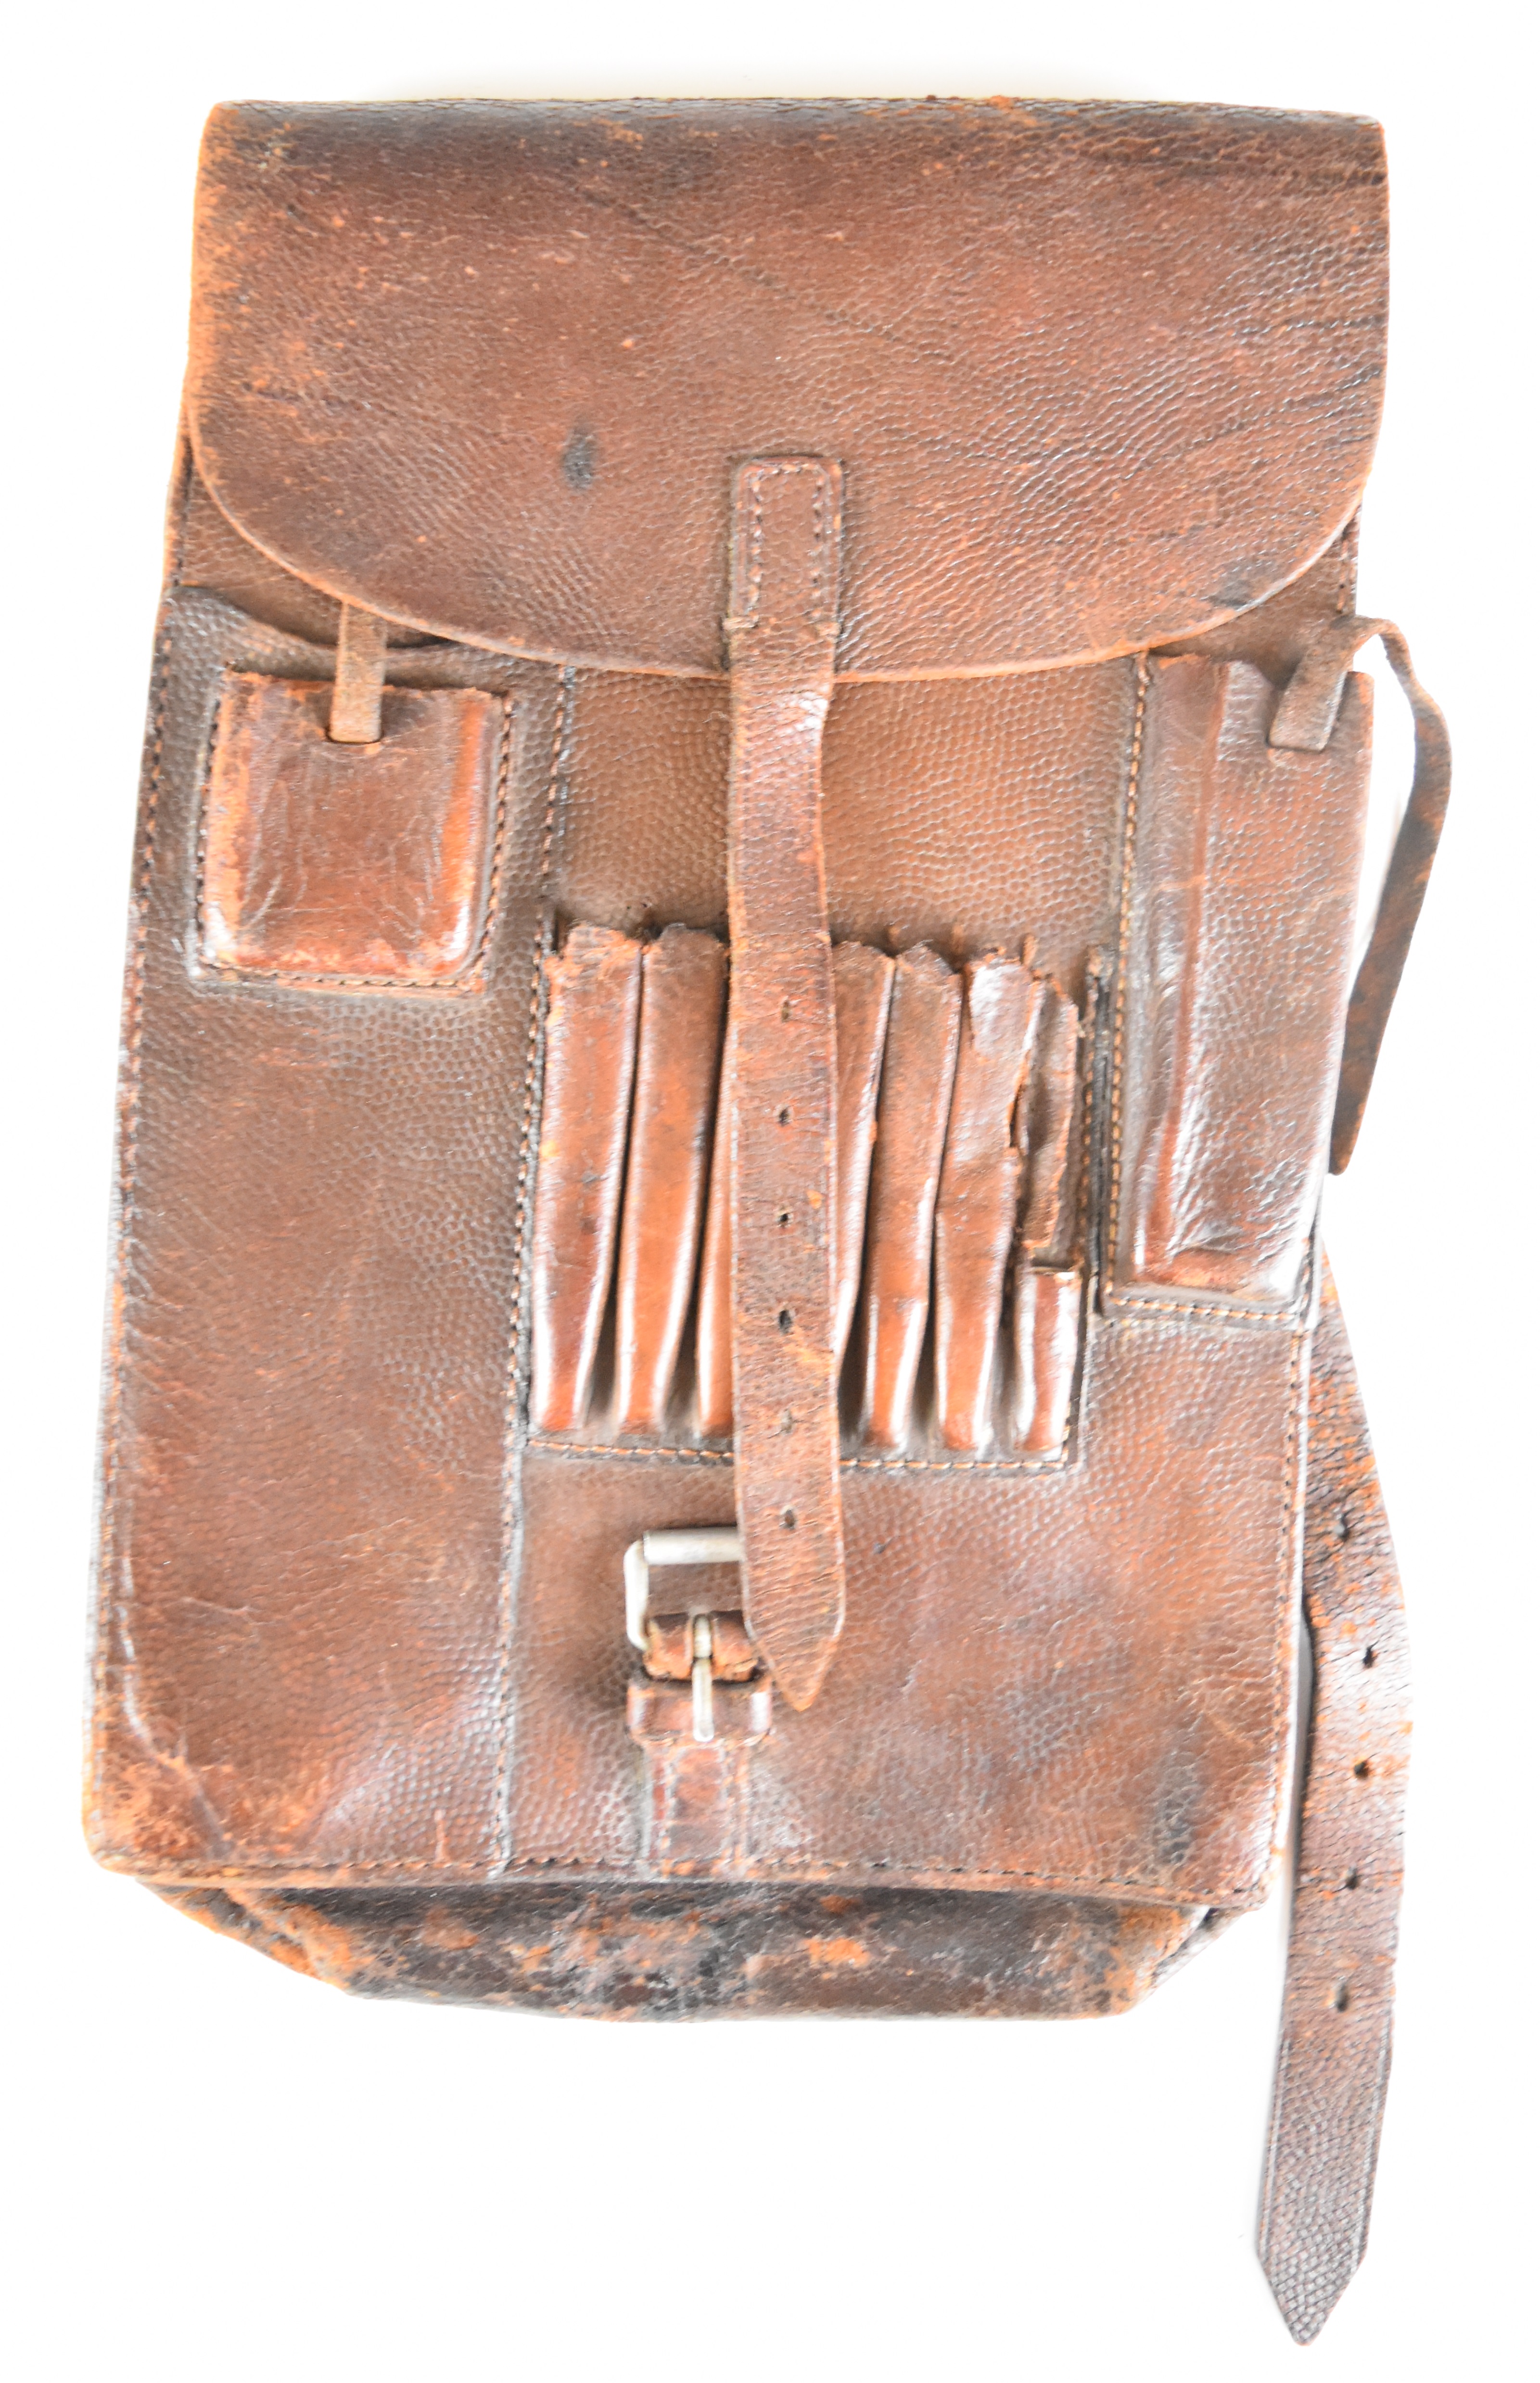 German WW2 brown leather map case with two section inner, leather securing straps and alloy buckles